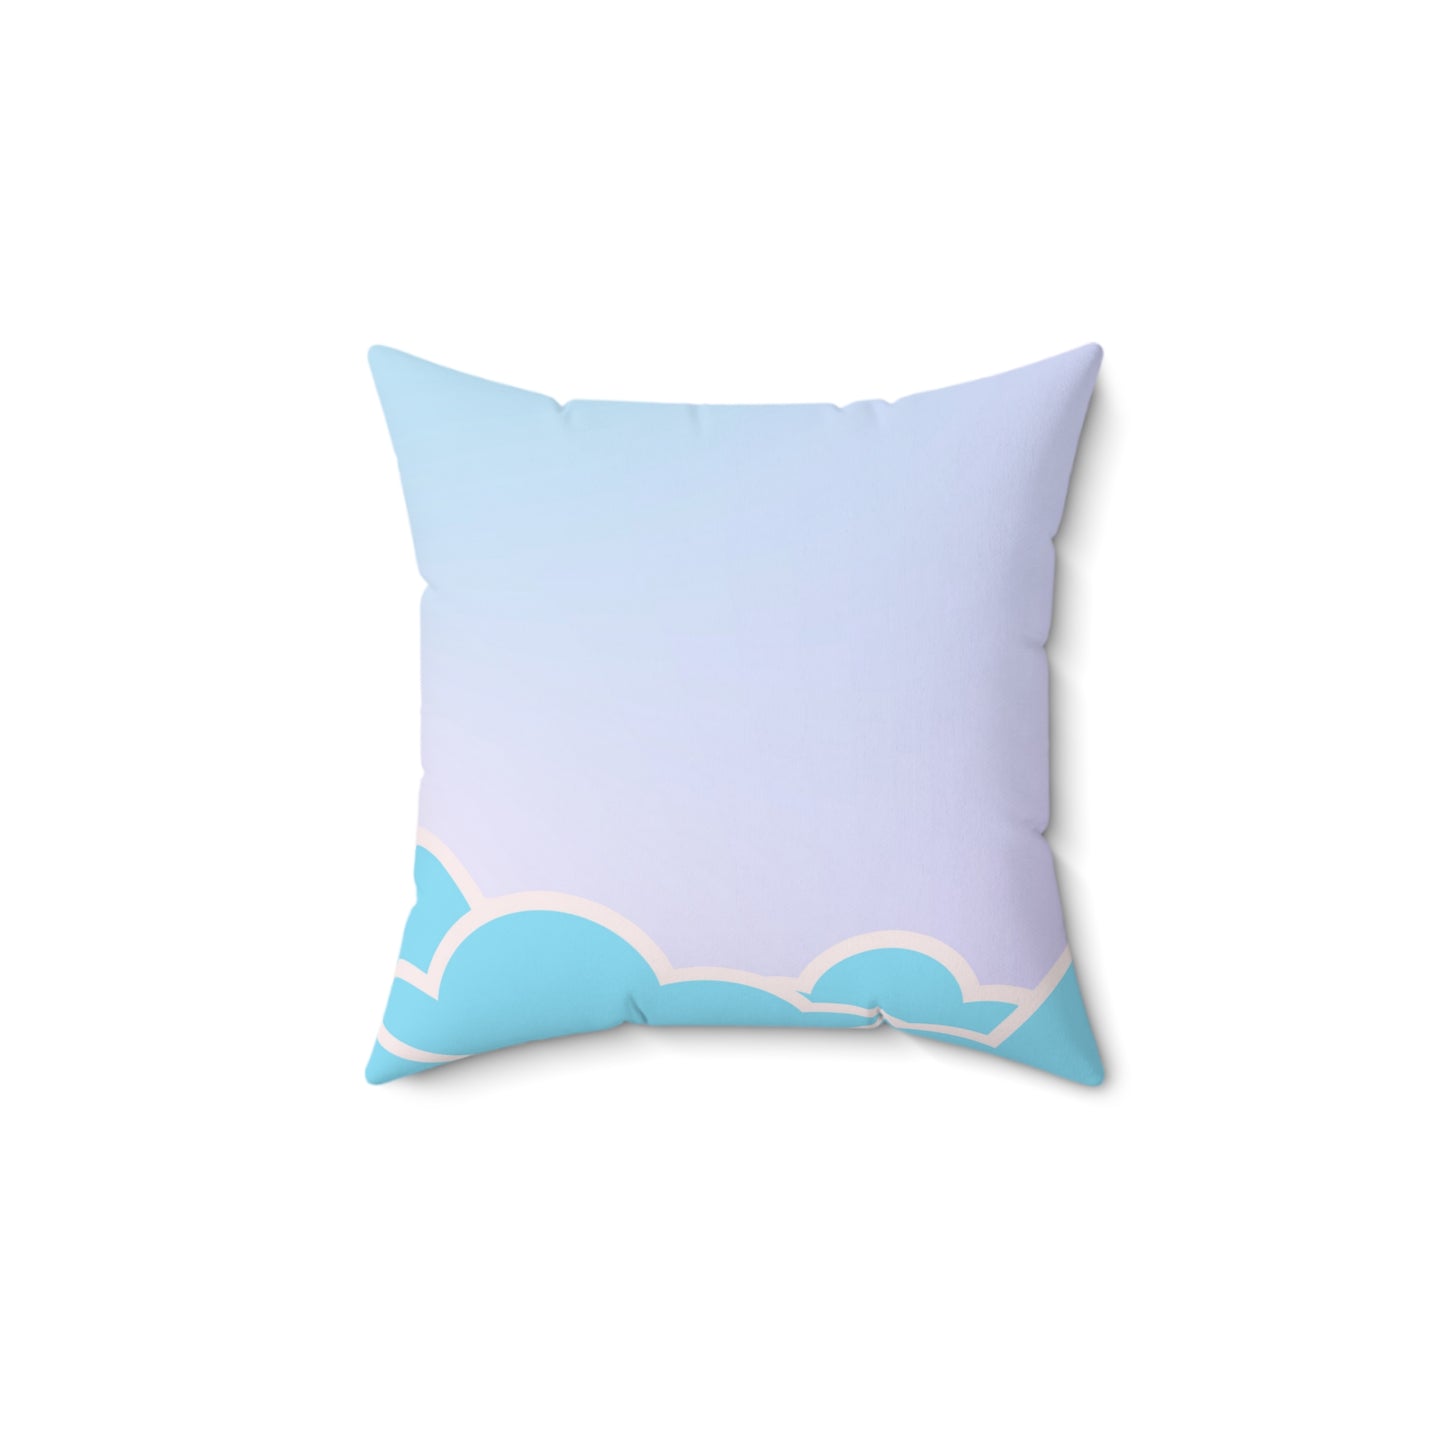 Bouncy Clouds Square Pillow